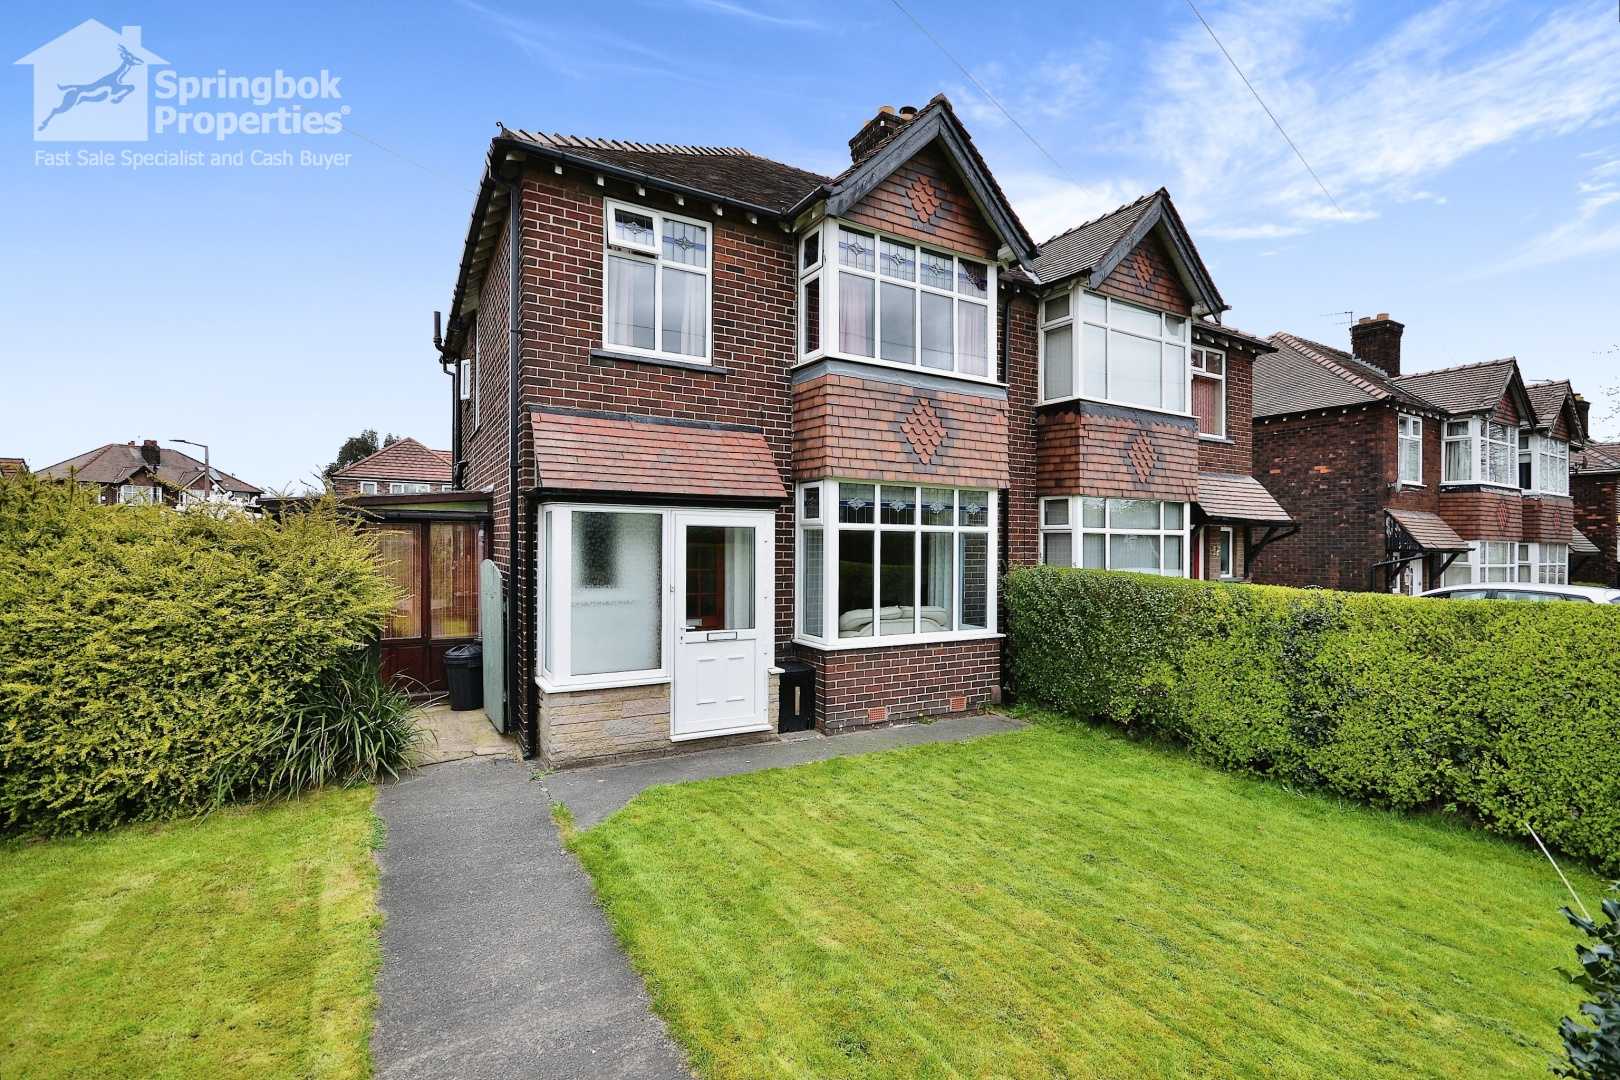 House in Cheadle Hulme, Stockport 11721723